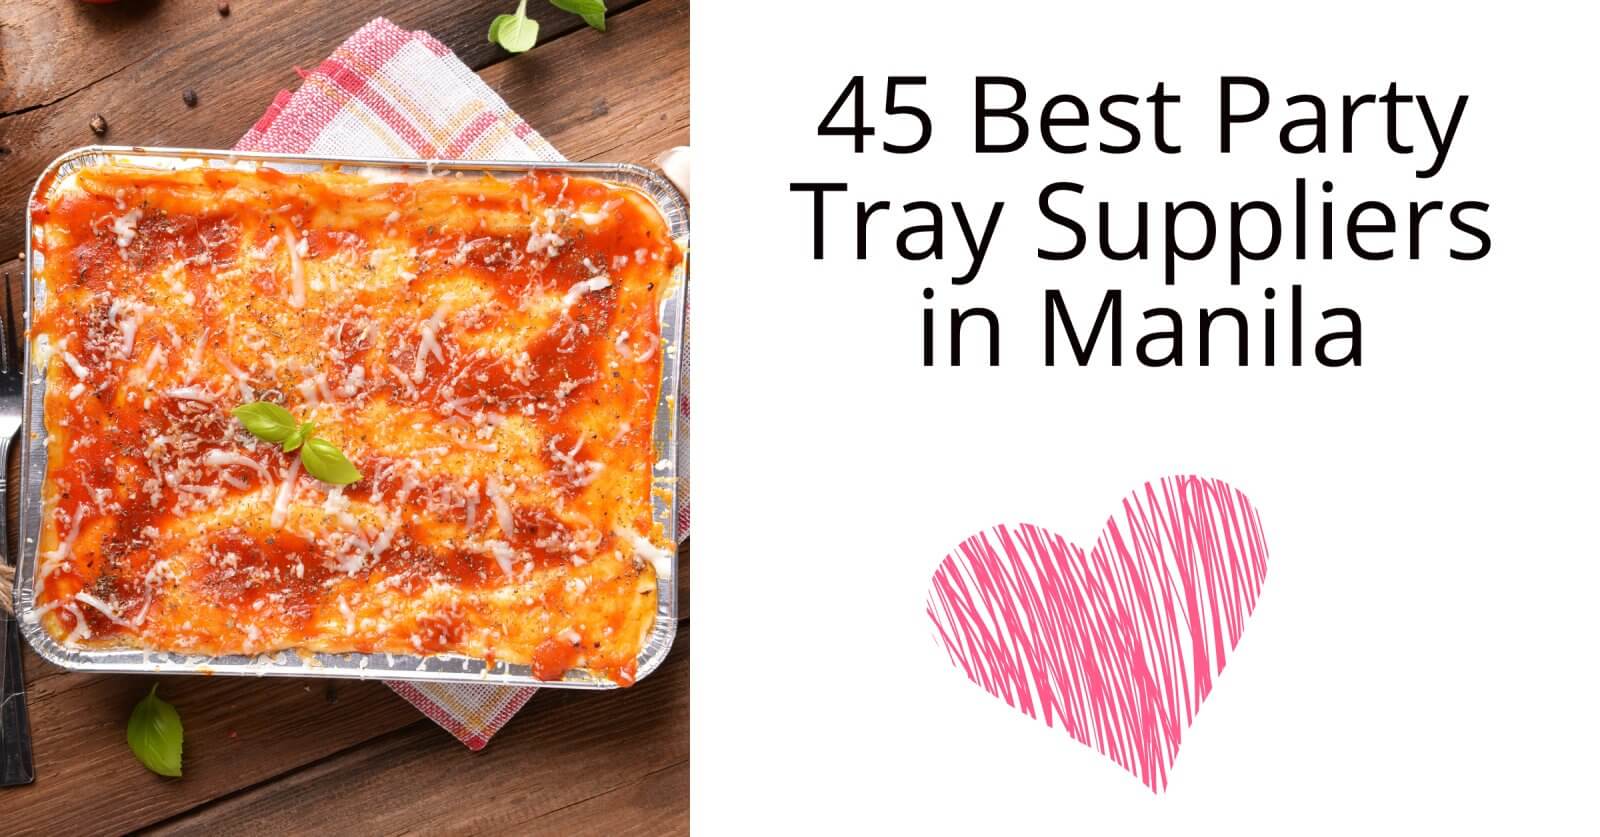 45 best party tray suppliers in metro manila, the foodie's paradise.